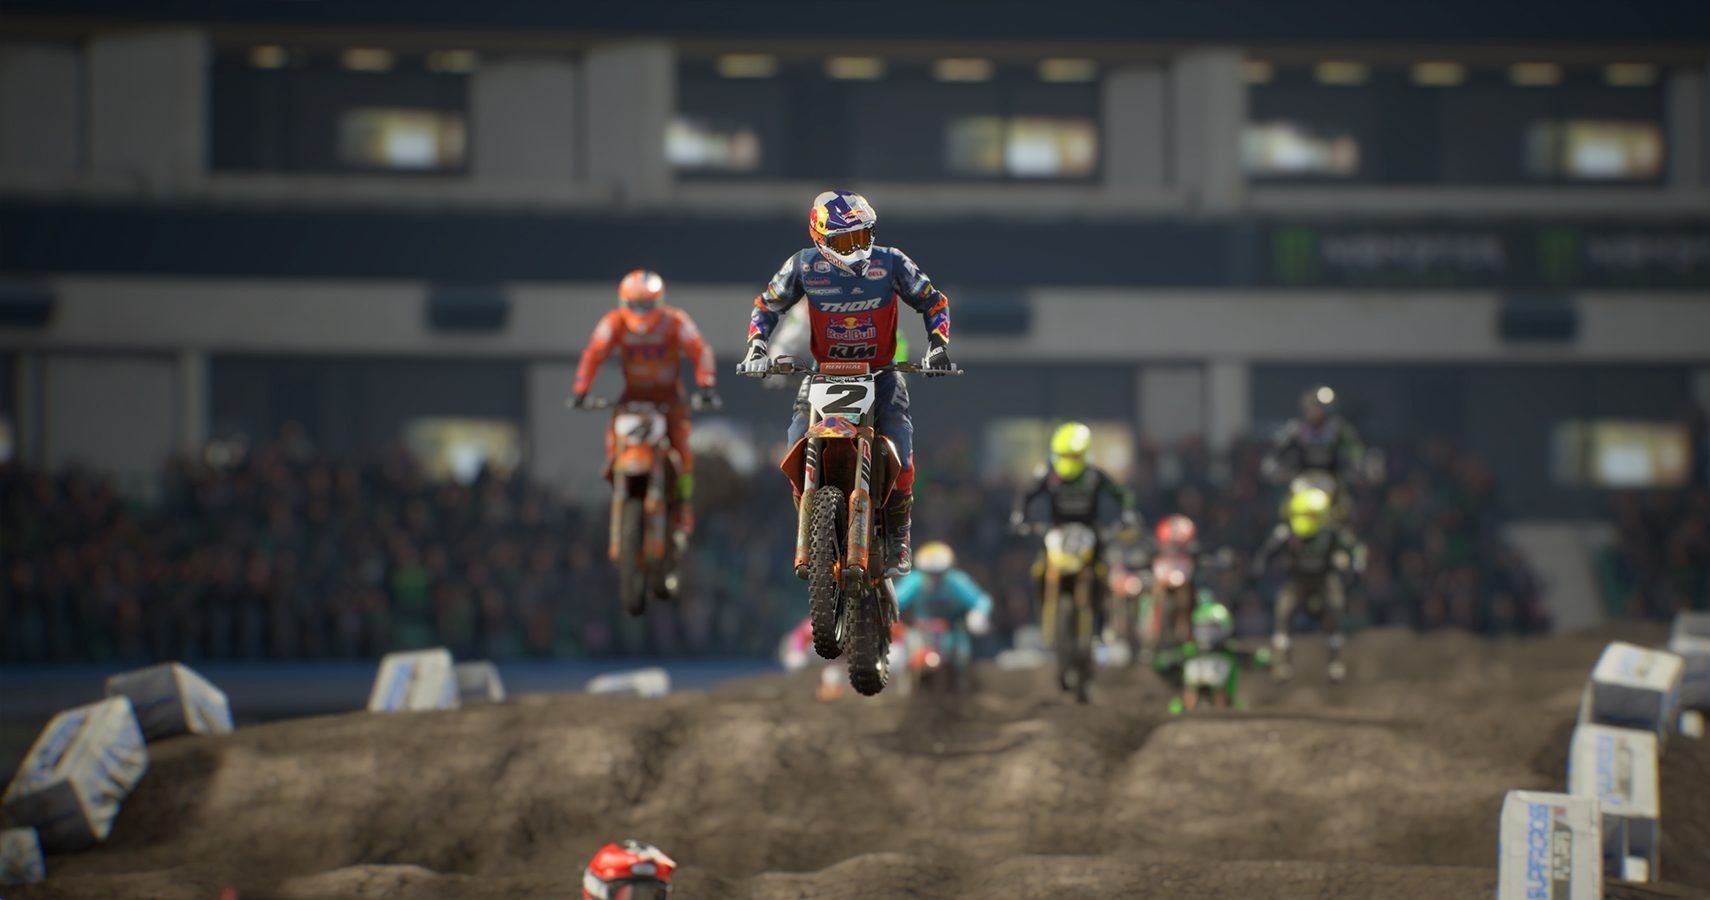 Supercross Rider Jumping Before Impact